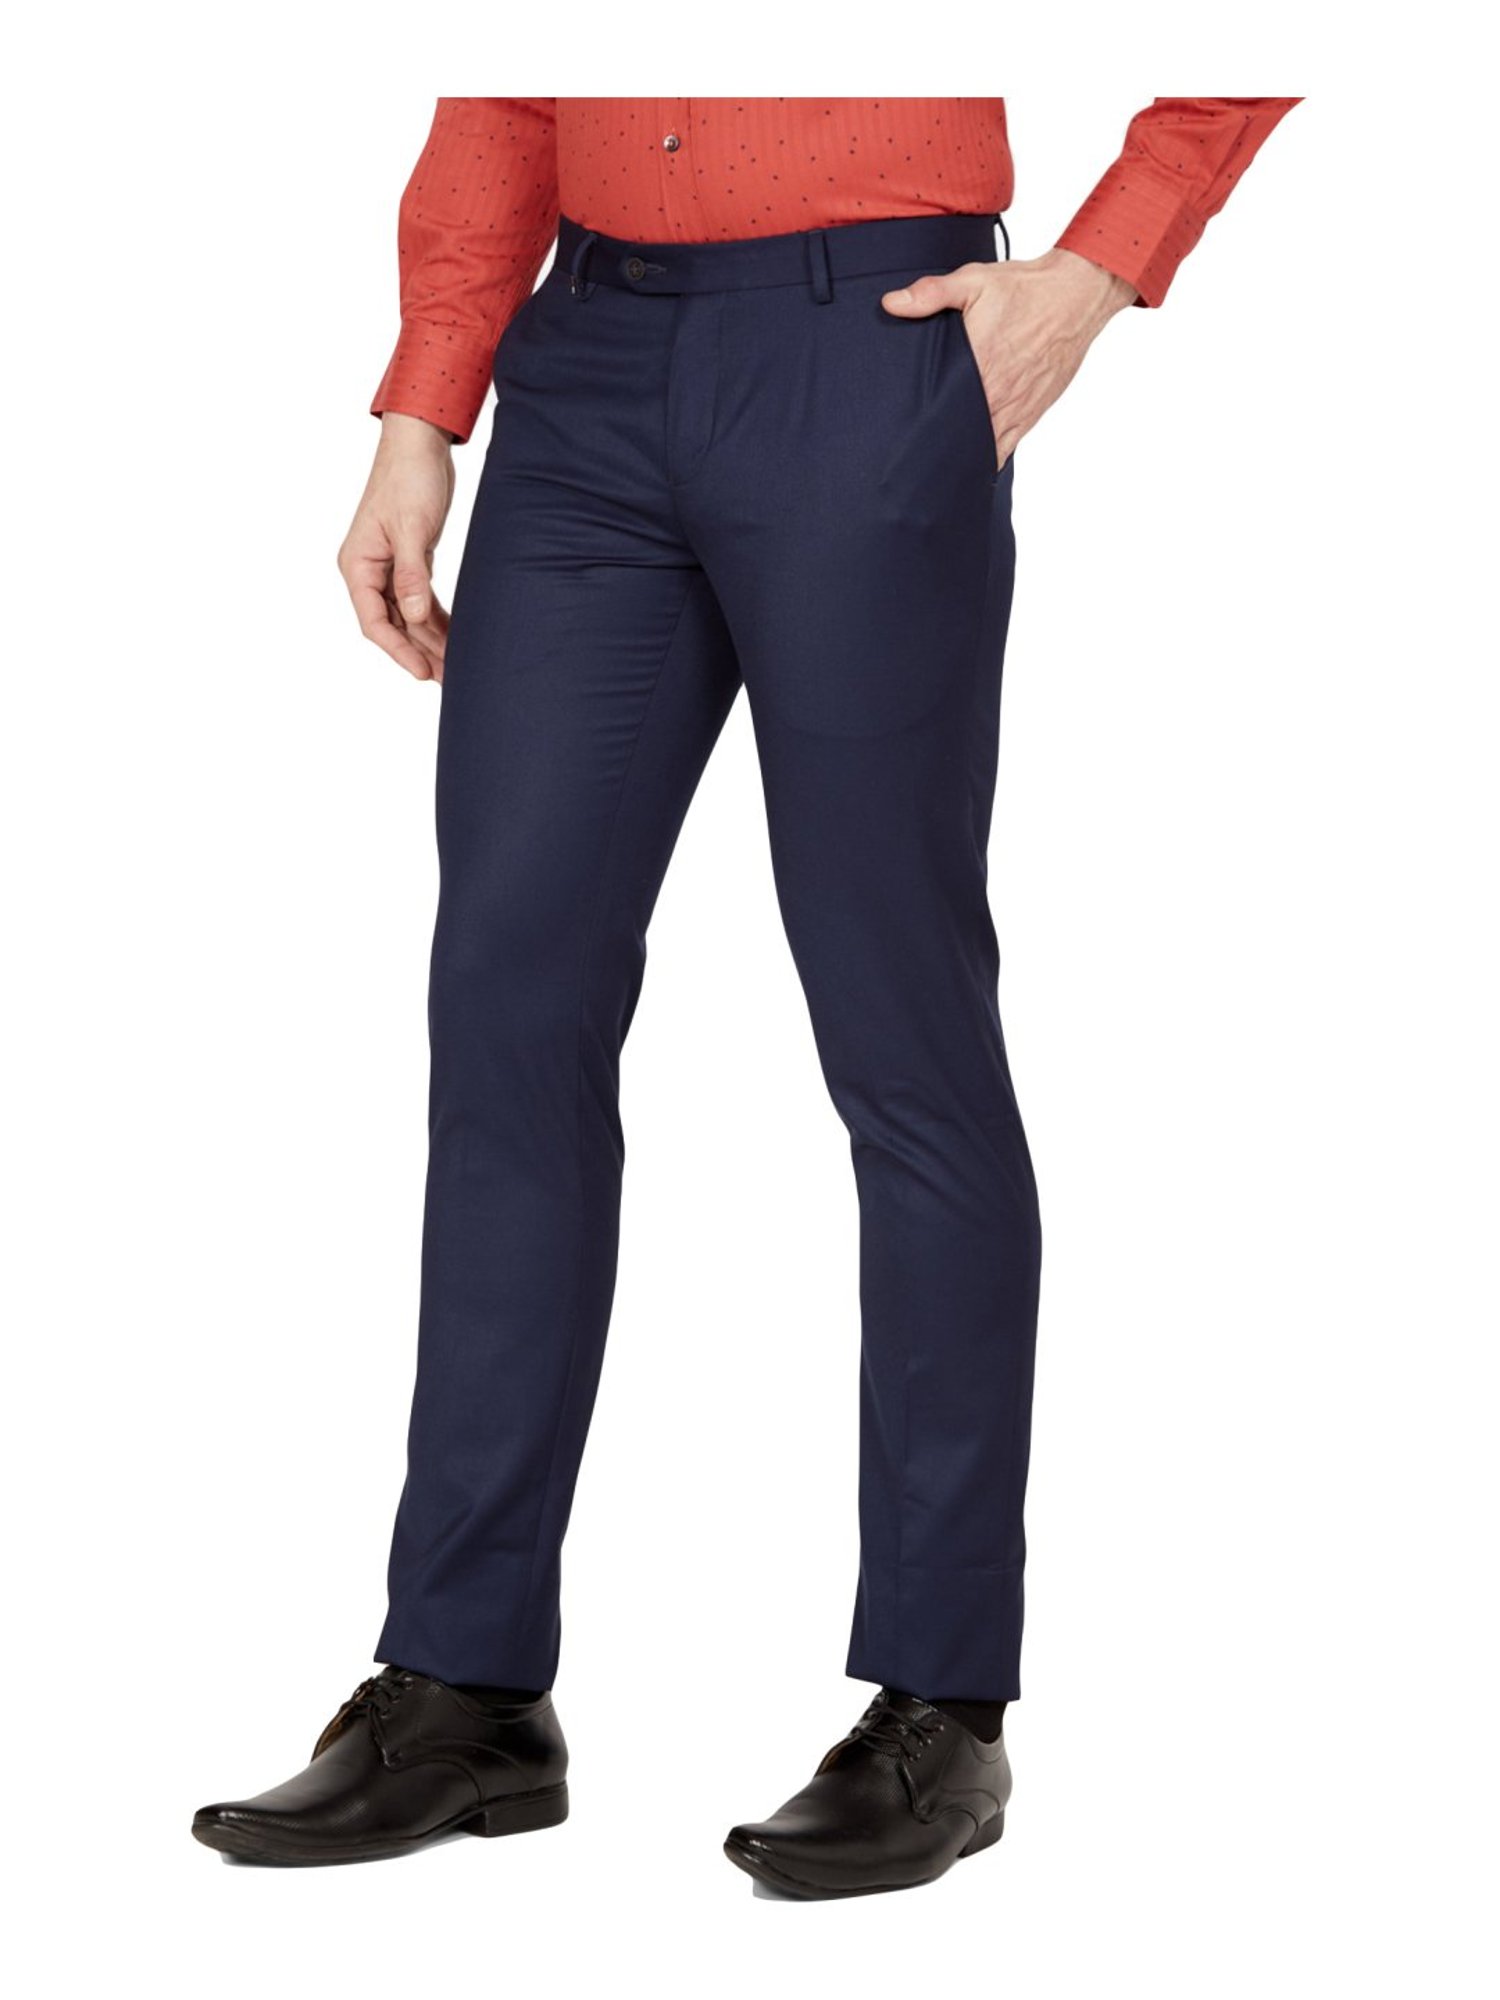 Oxemberg Men Cream Regular Formal Trousers - Buy Oxemberg Men Cream Regular Formal  Trousers Online at Best Prices in India on Snapdeal